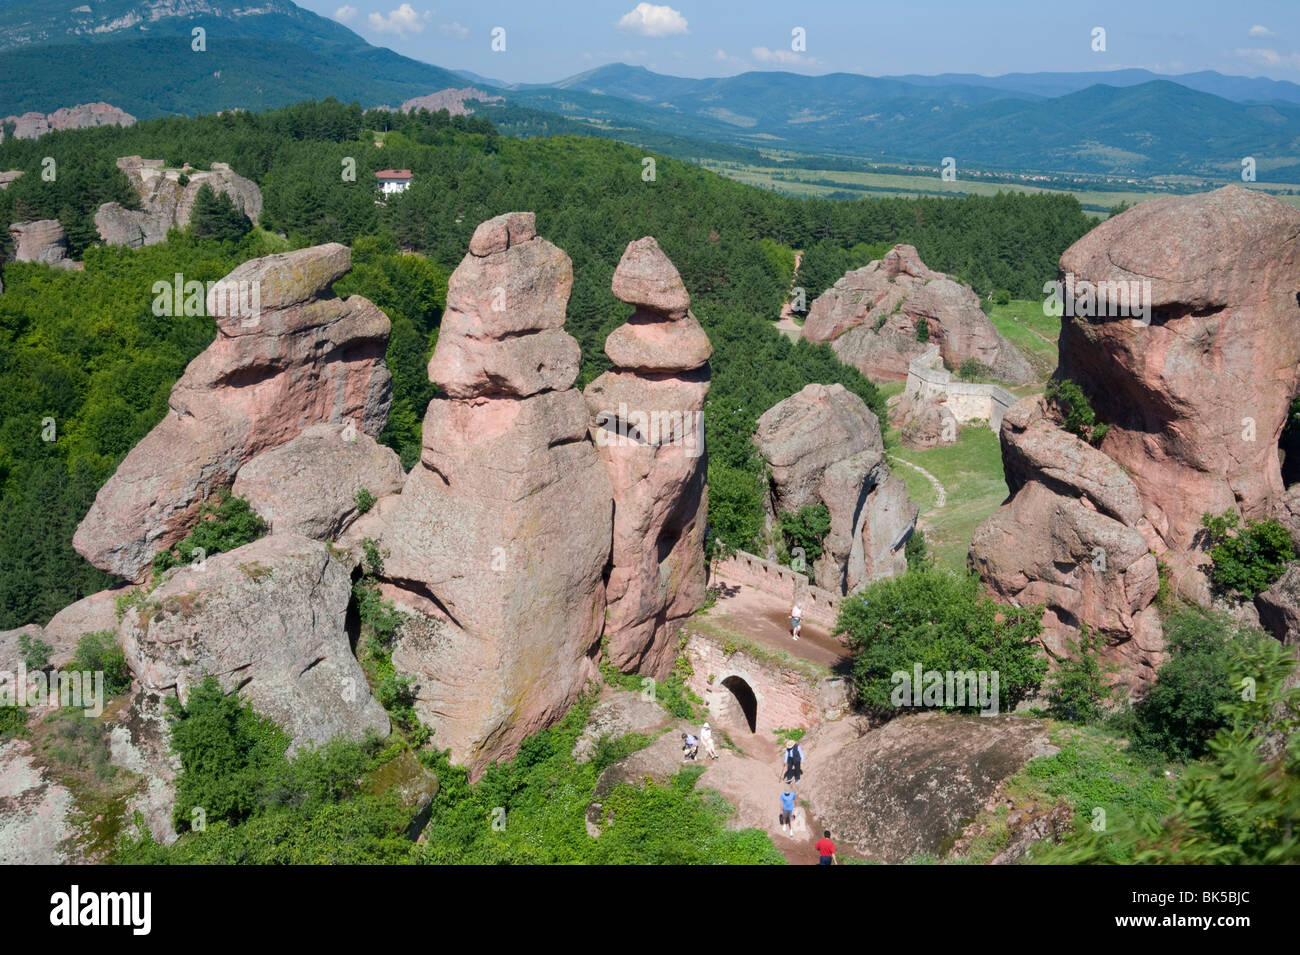 The towering natural rock formations at Belogradchik Fortress, Bulgaria, Europe Stock Photo